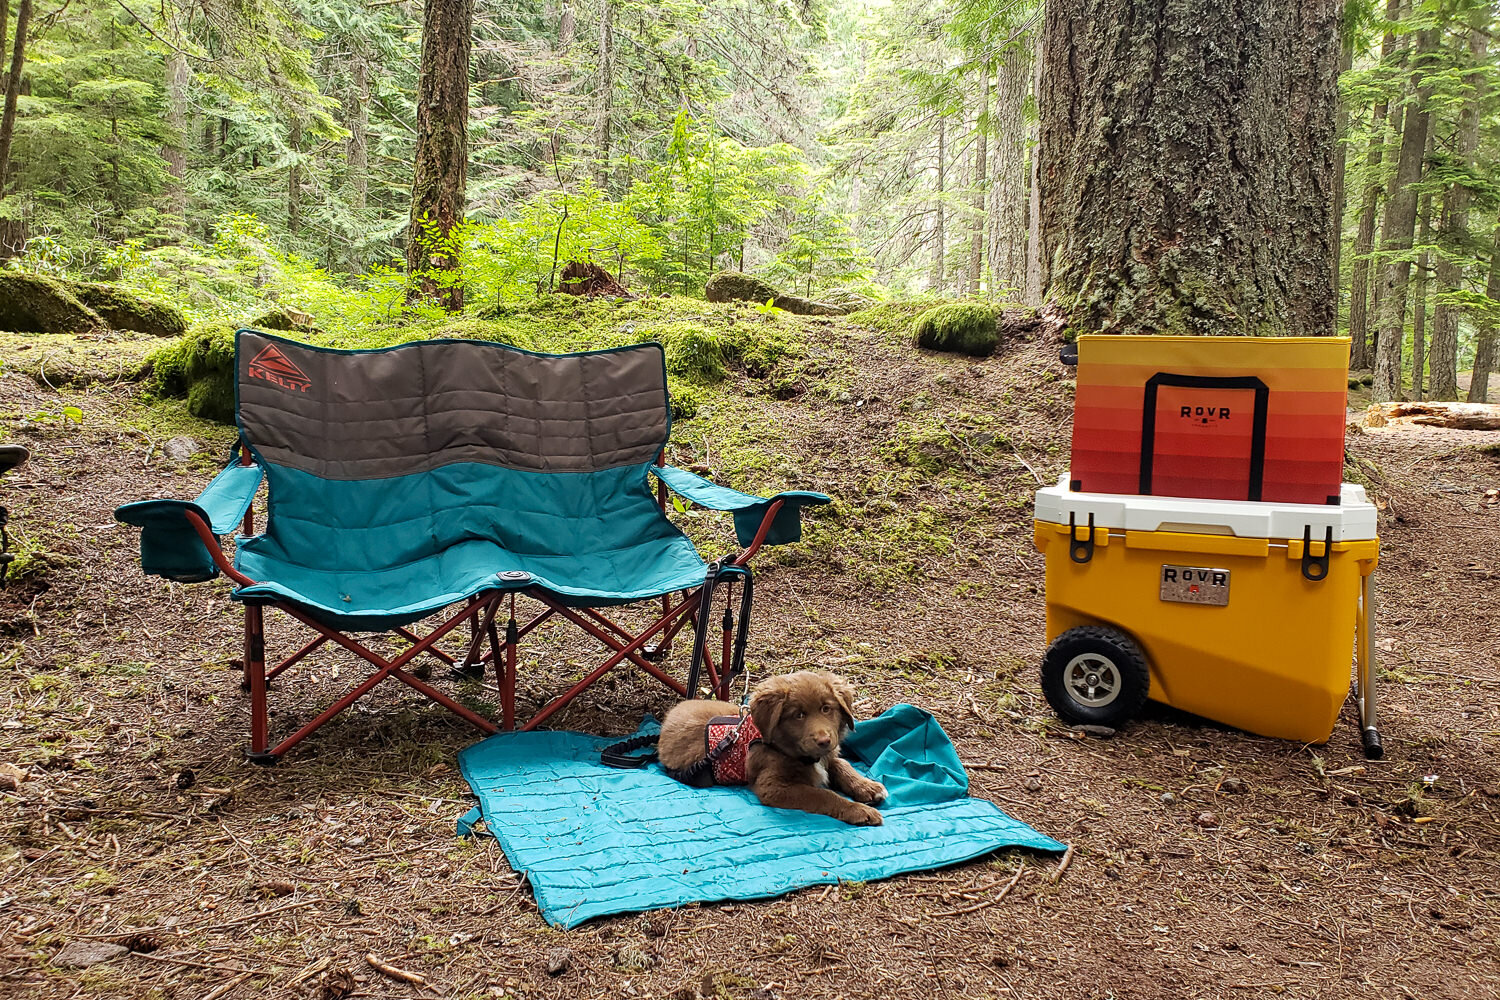 The Rollr Rovr 60 Cooler is great for walk-in campsites since it’s portable and has a nifty storage bin for hauling gear